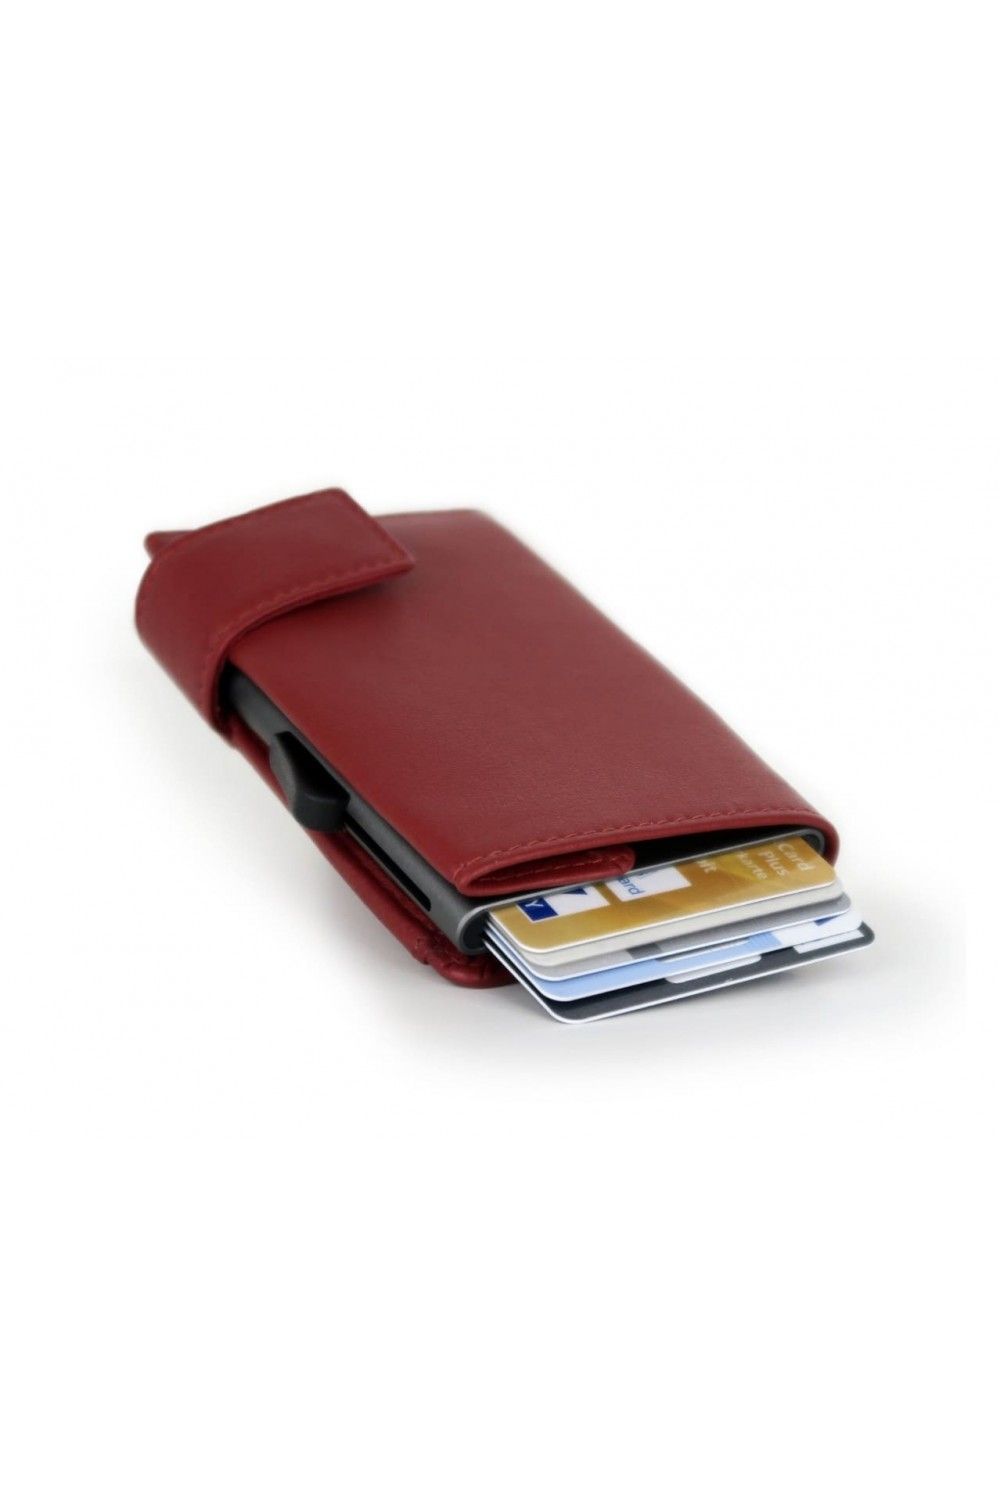 SecWal Card Case XL DK Leather Red